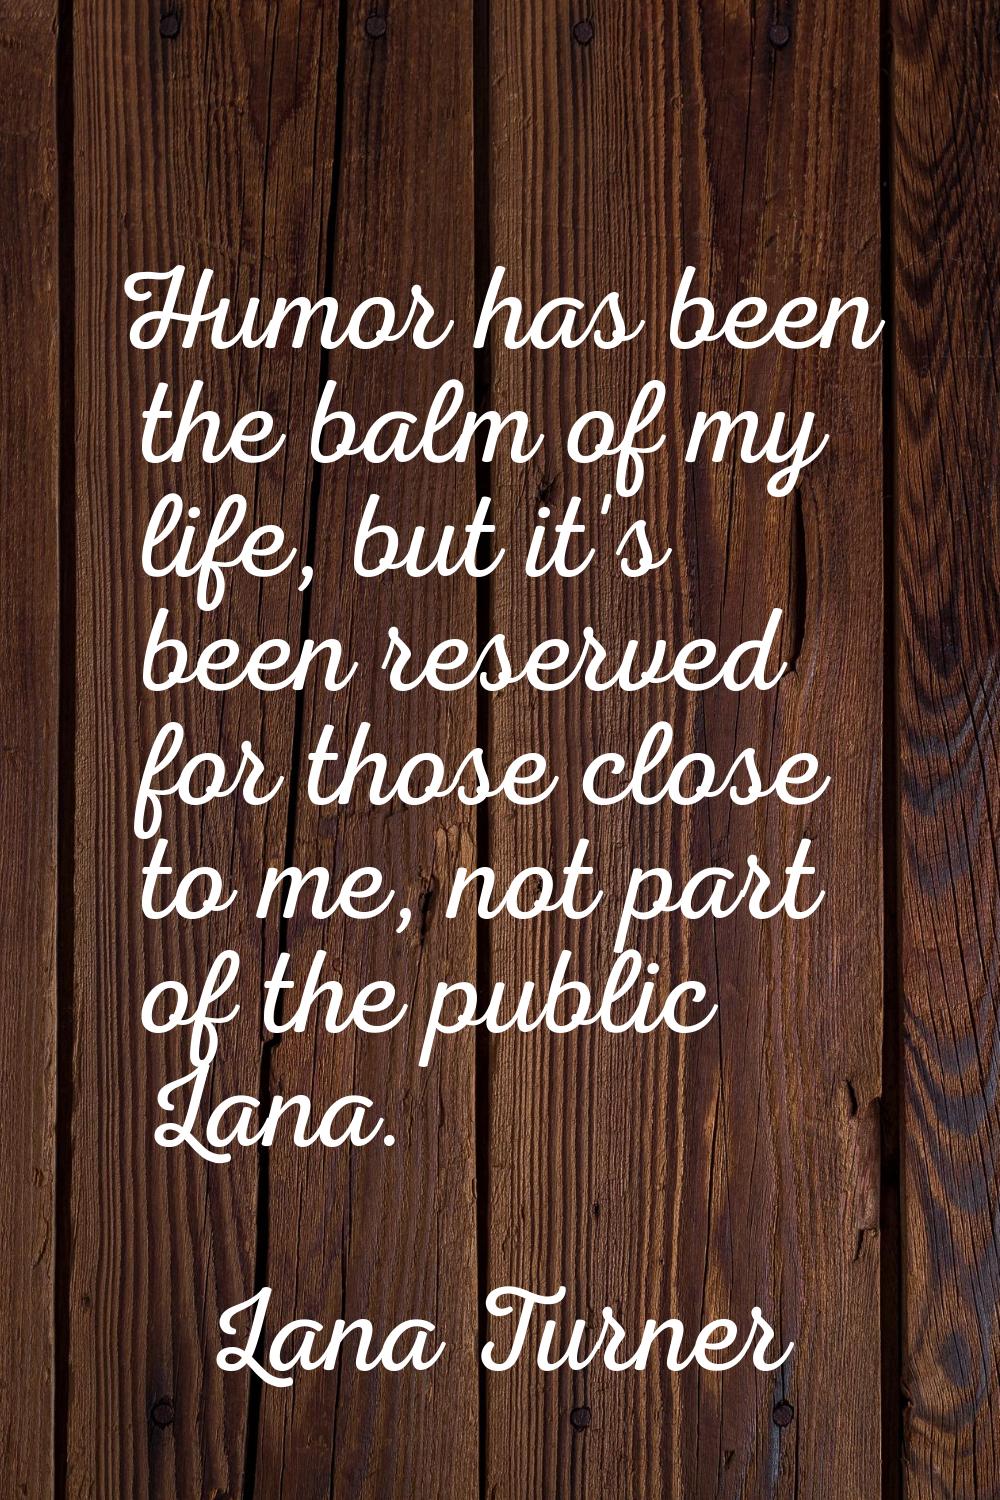 Humor has been the balm of my life, but it's been reserved for those close to me, not part of the p